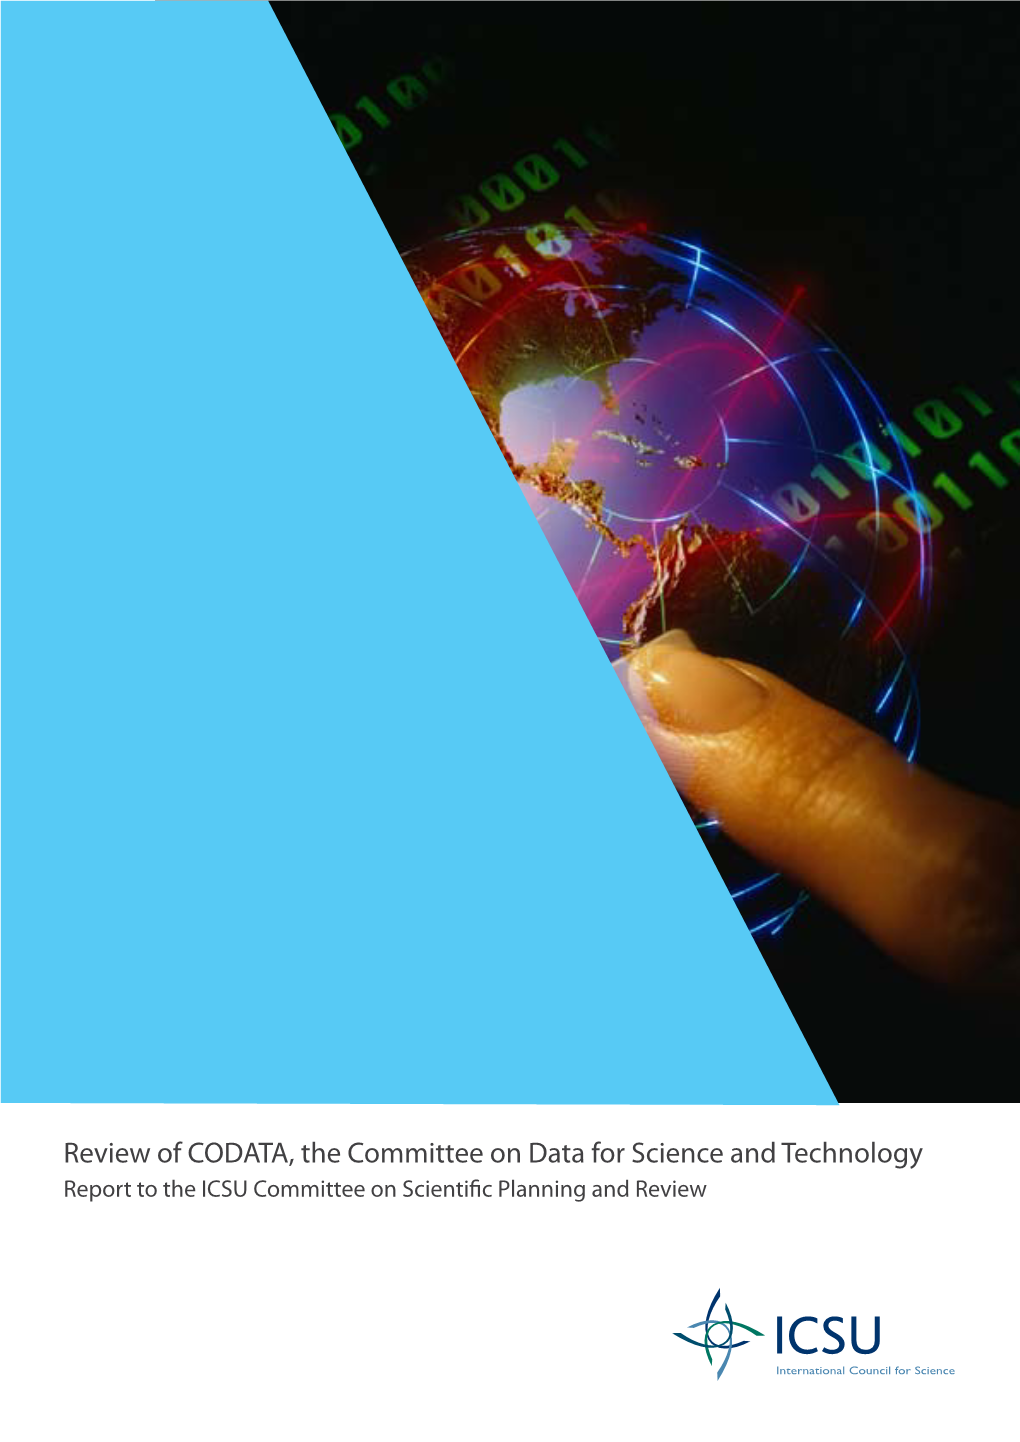 Review of CODATA, the Committee on Data for Science and Technology Report to the ICSU Committee on Scientific Planning and Review